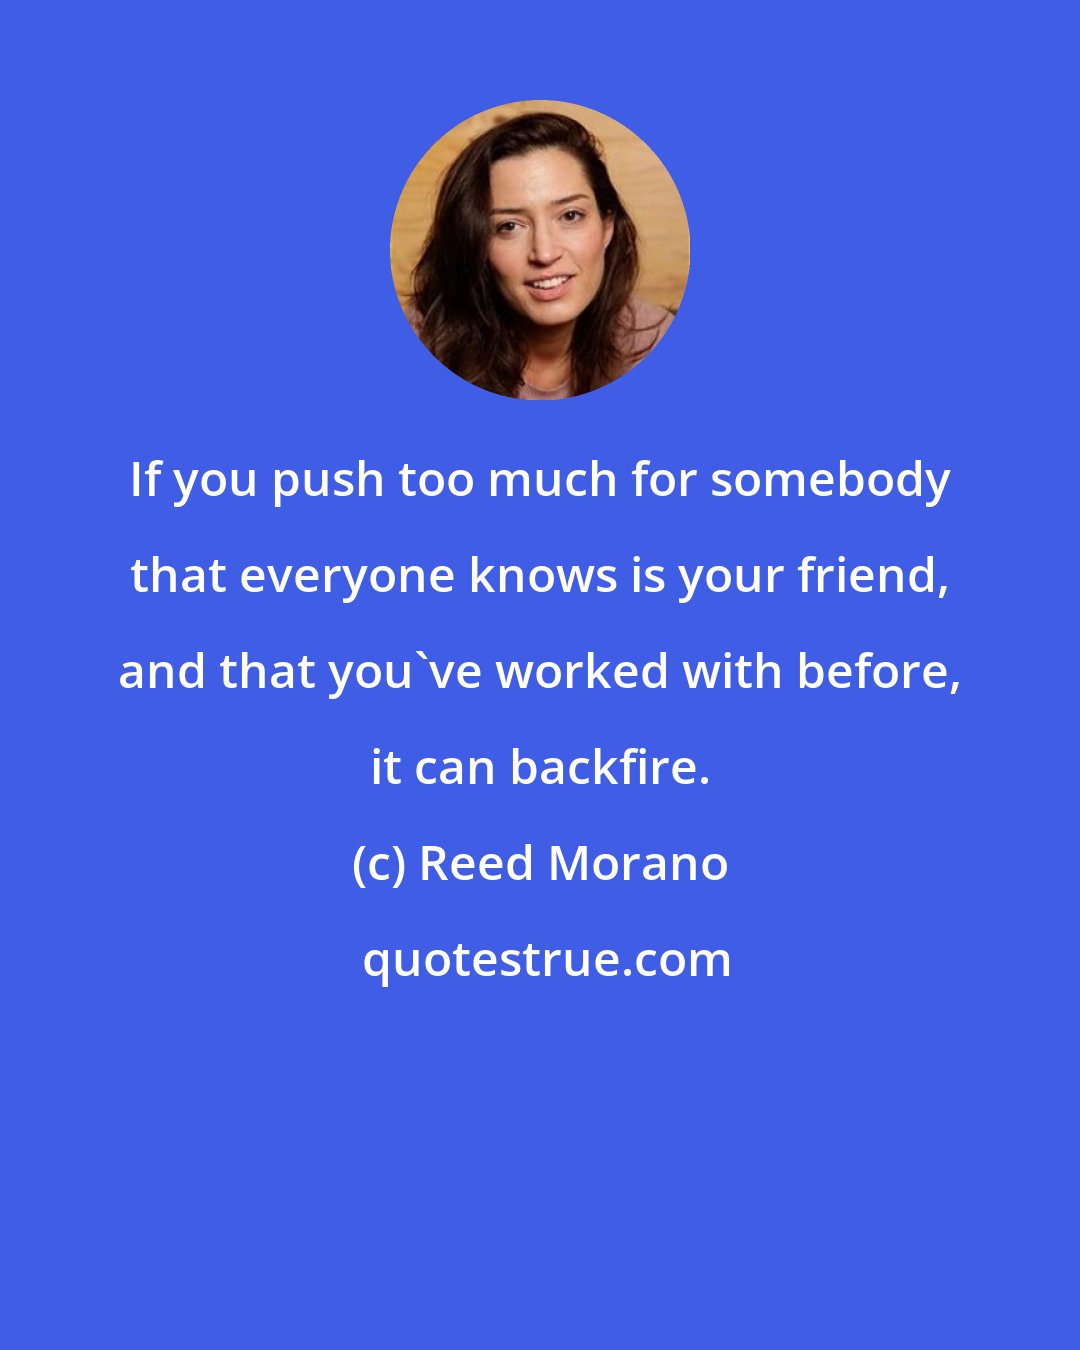 Reed Morano: If you push too much for somebody that everyone knows is your friend, and that you've worked with before, it can backfire.